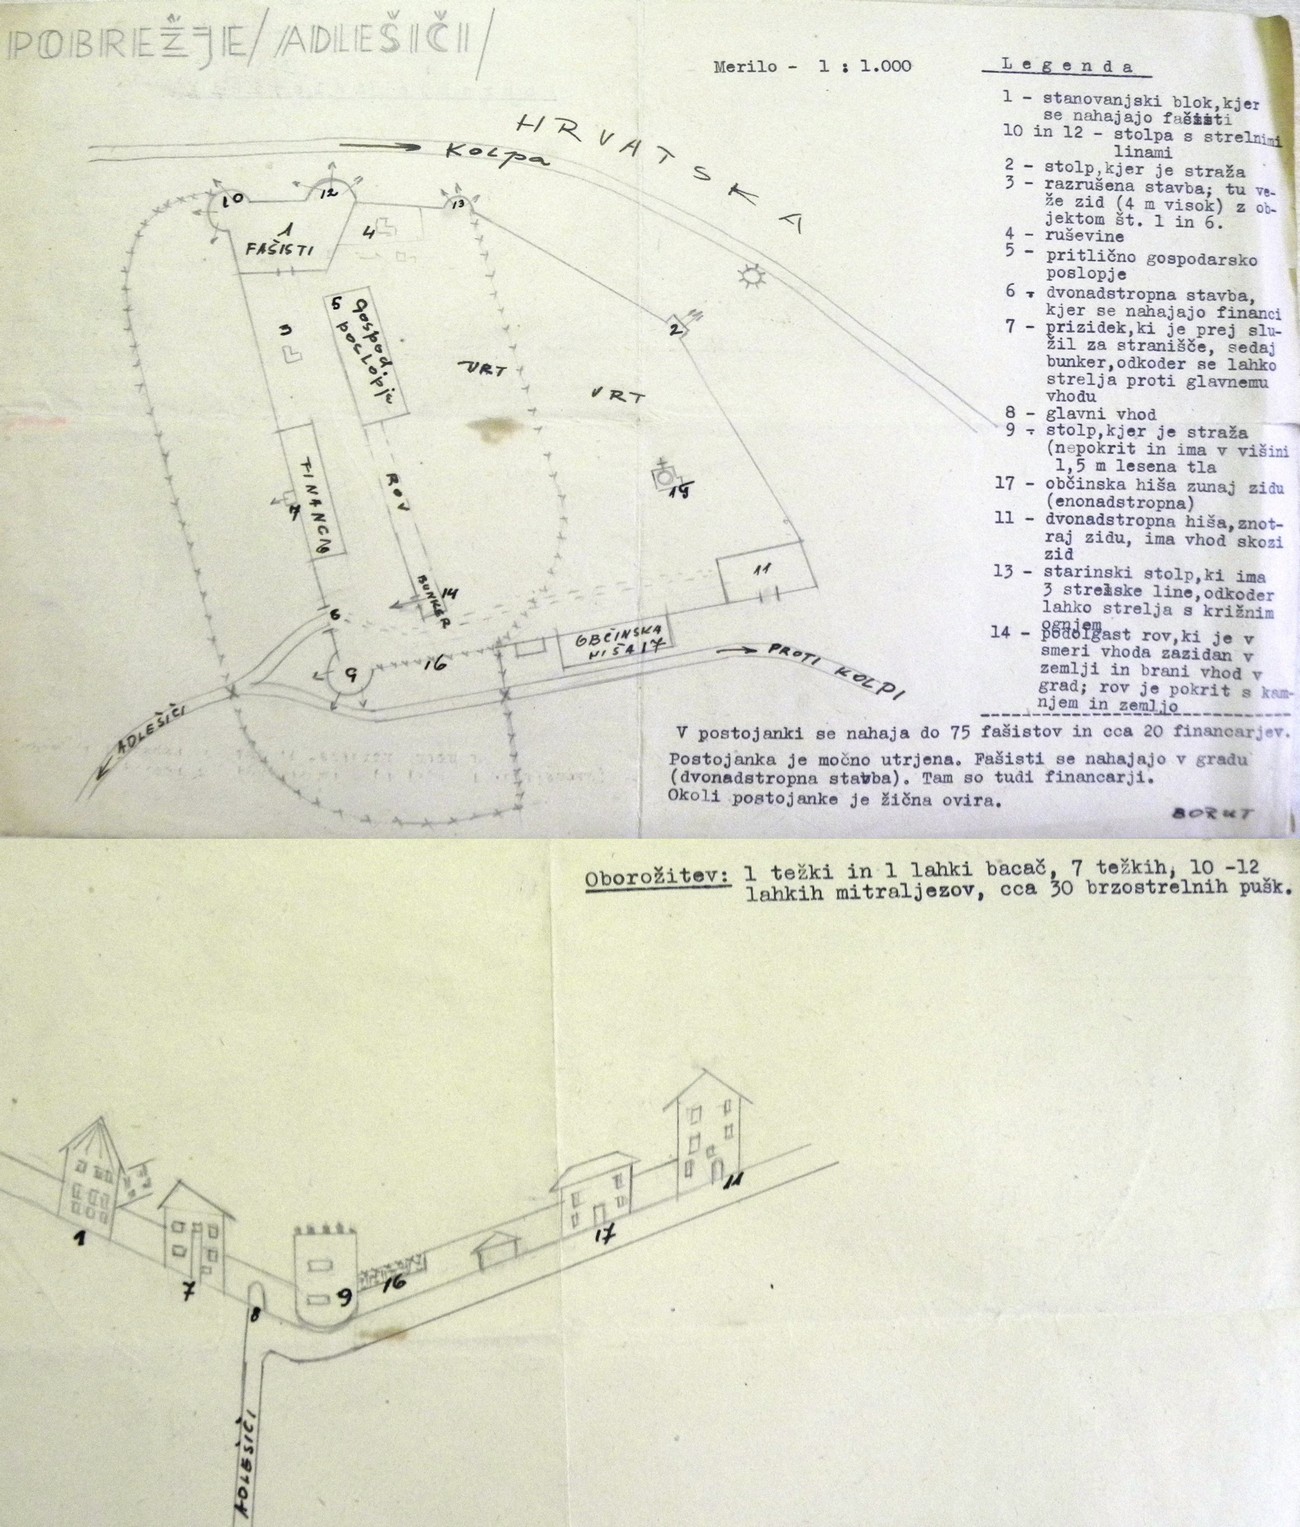 A partisan sketch of the Fascist and Financial Guard post in Pobrežje near Adlešiči drawn at a scale of 1 : 1000. It was most likely created at the end of 1942 or in the first half of 1943. Archives of the RS.